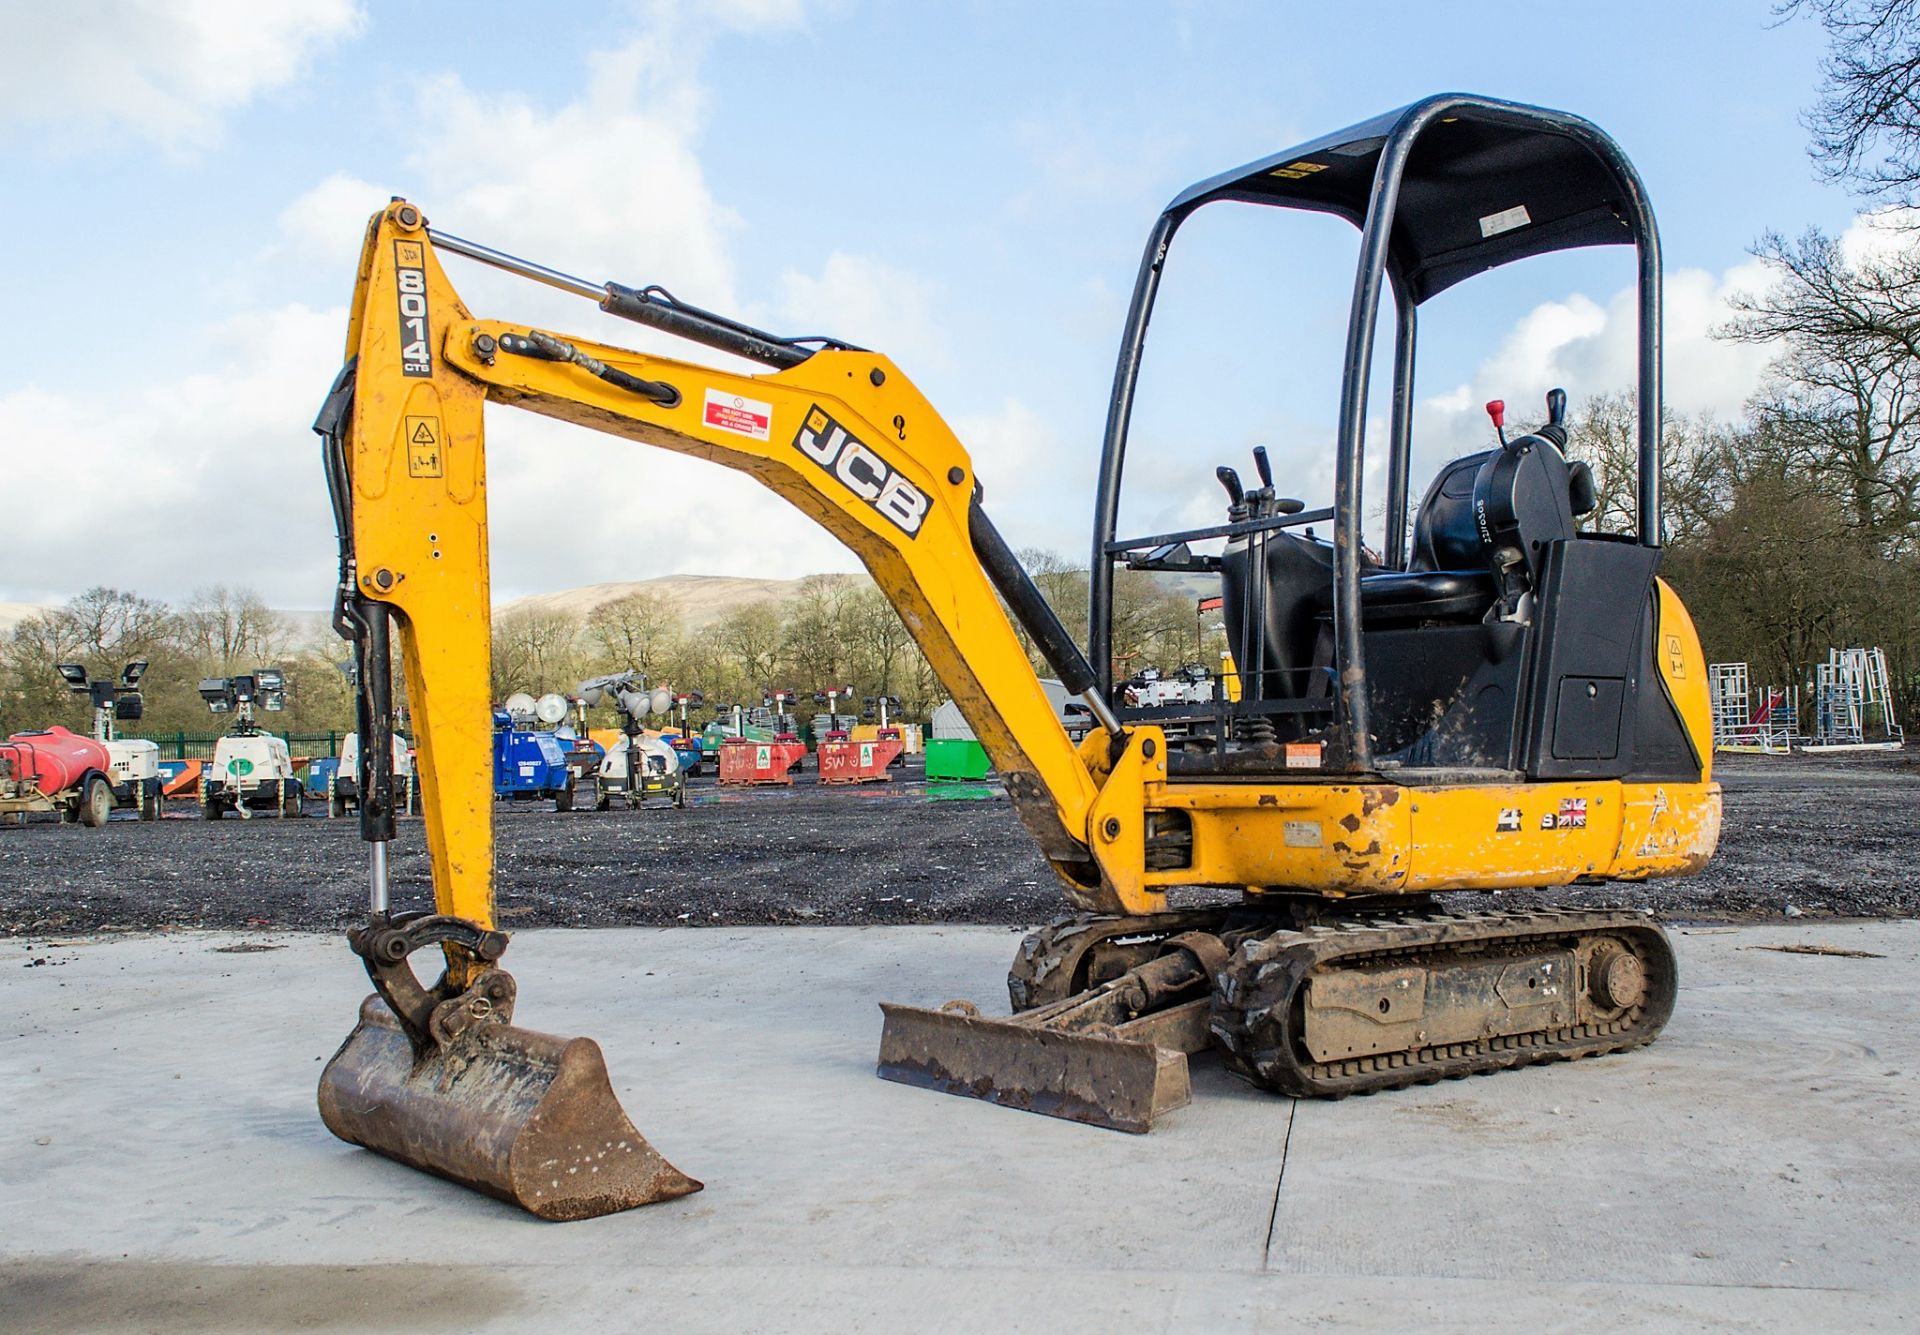 JCB 801.4 1.5 CTS tonne rubber tracked mini excavator Year: 2014 S/N: 2078489 Recorded Hours: 1224